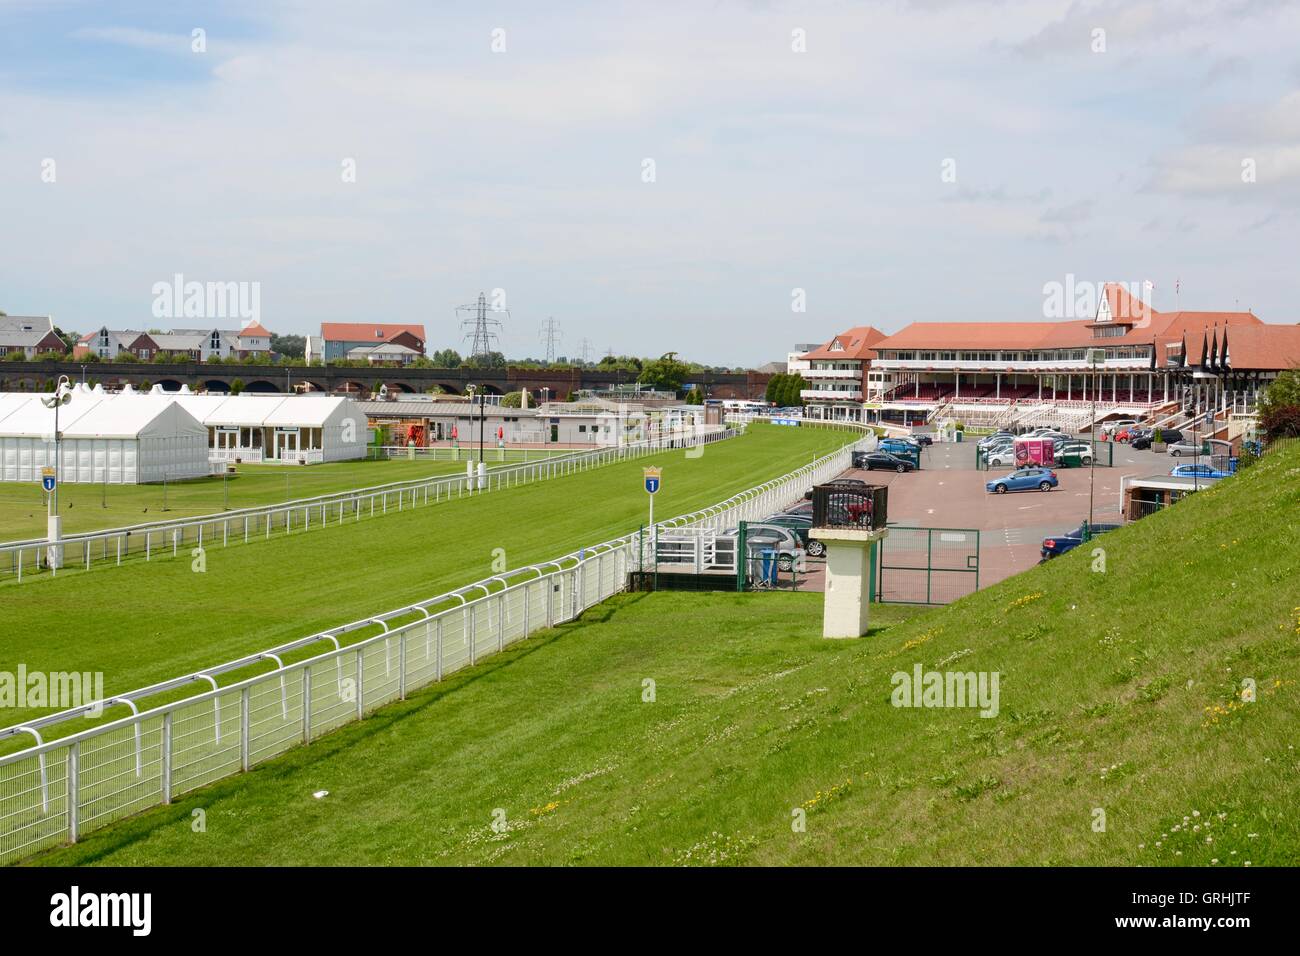 The popular horse racecourse in the city of Chester, Cheshire, UK Stock Photo